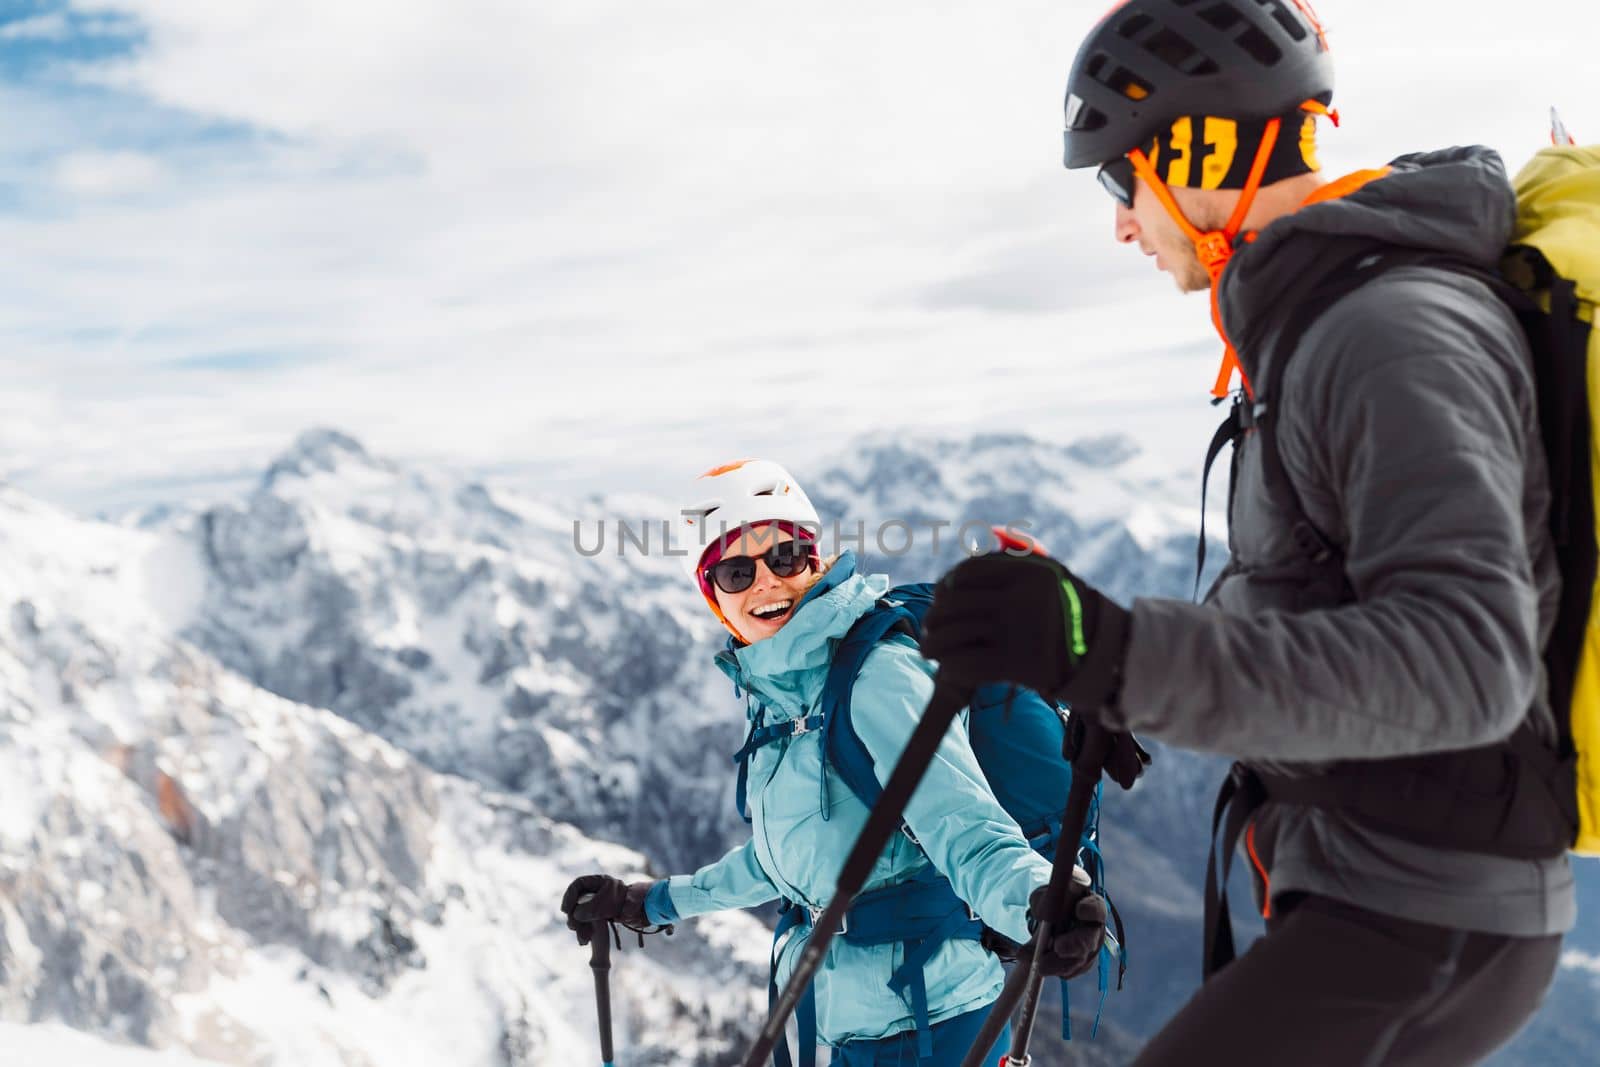 Waist up smiling couple of mountaineers ski touring in the snowy Alps by VisualProductions